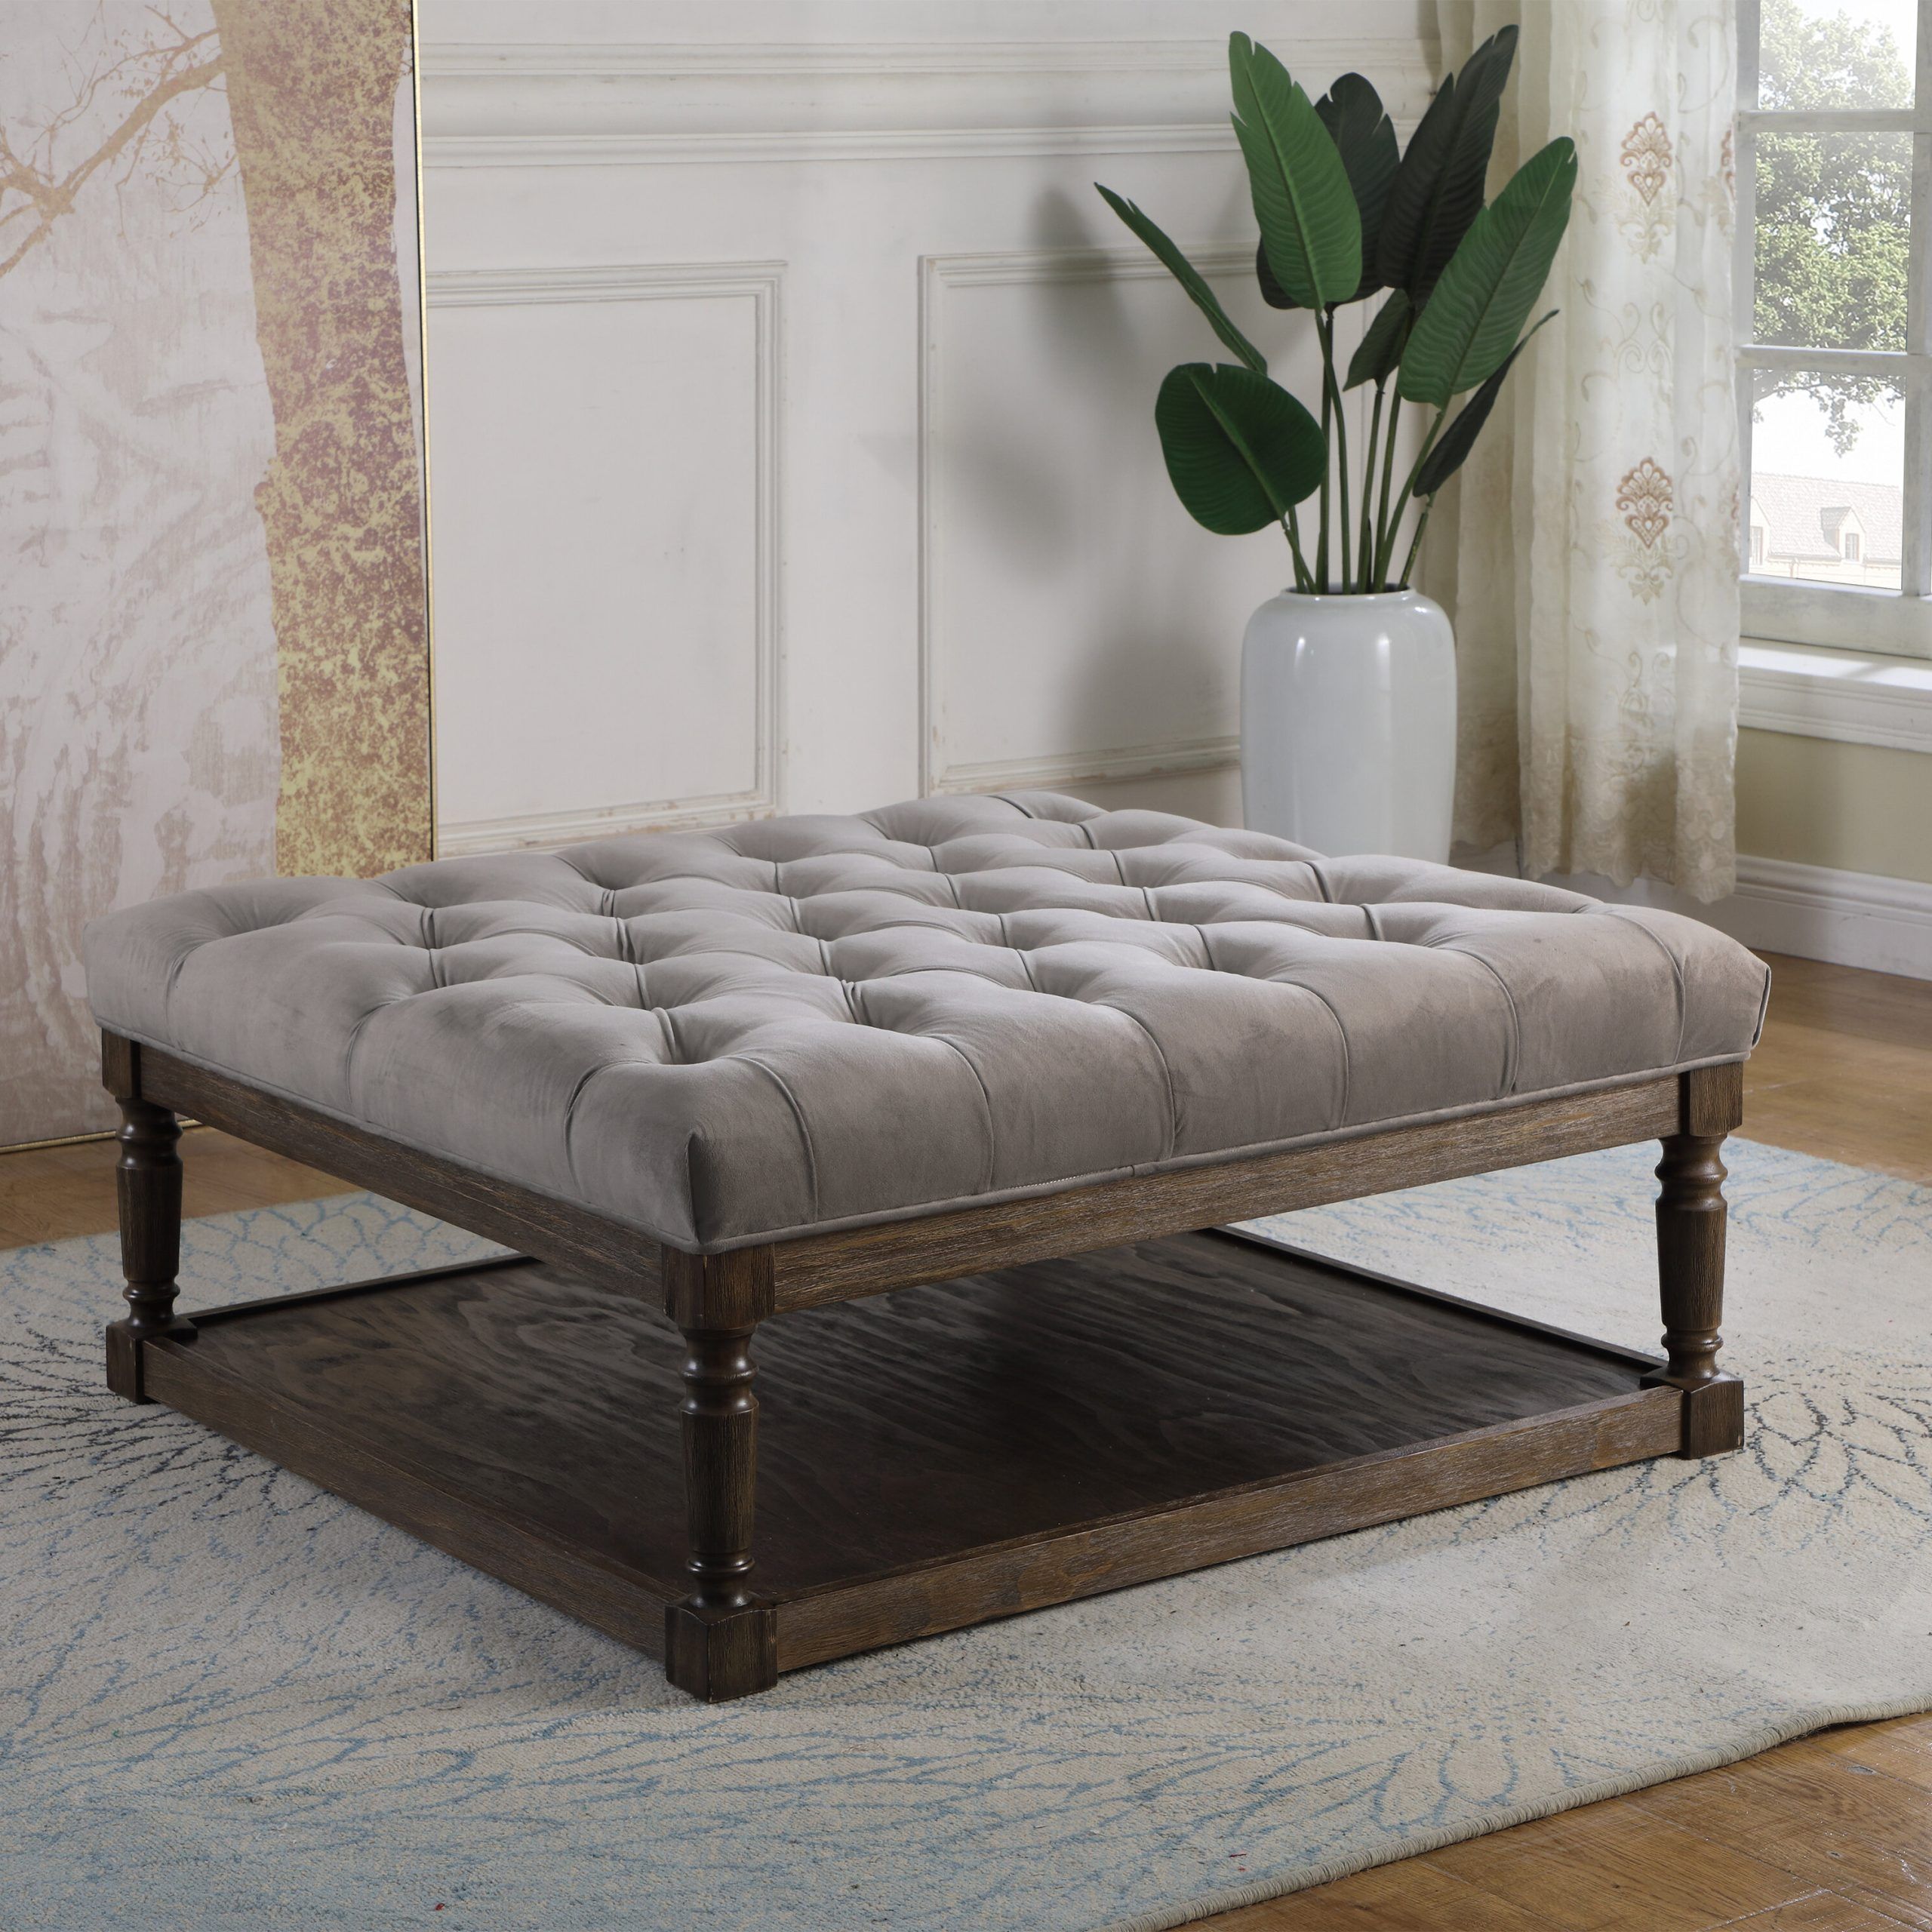 Alcott Hill® Kirkby Upholstered Ottoman & Reviews | Wayfair Within Upholstered Ottomans (View 6 of 15)